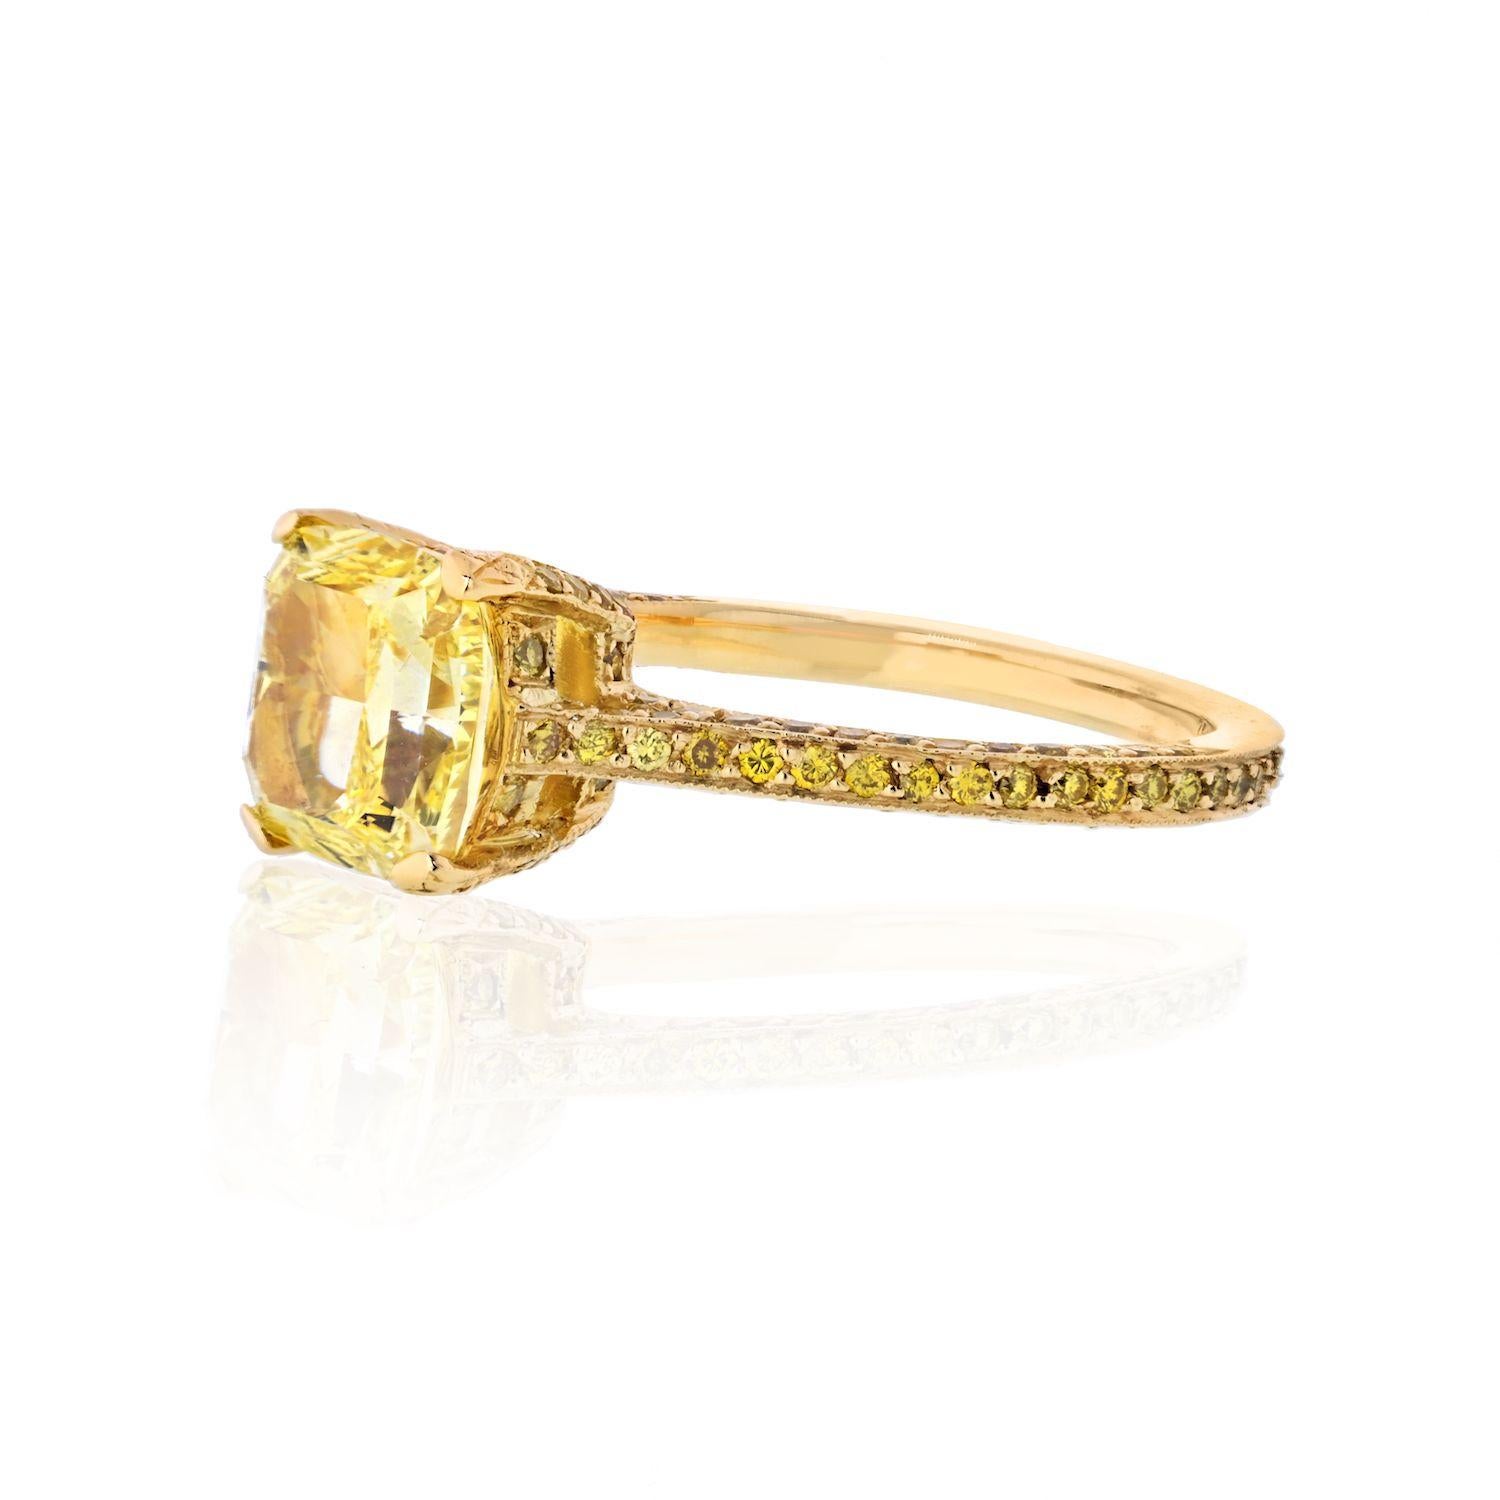 This is a lovely fancy yellow diamond engagement ring for someone who is after a very special jewel. Crafted in 18K yellow gold this ring is mounted with a 2.15 carat Cushion Cut Fancy Yellow Intense diamond that is GIA certified SI1 clarity.